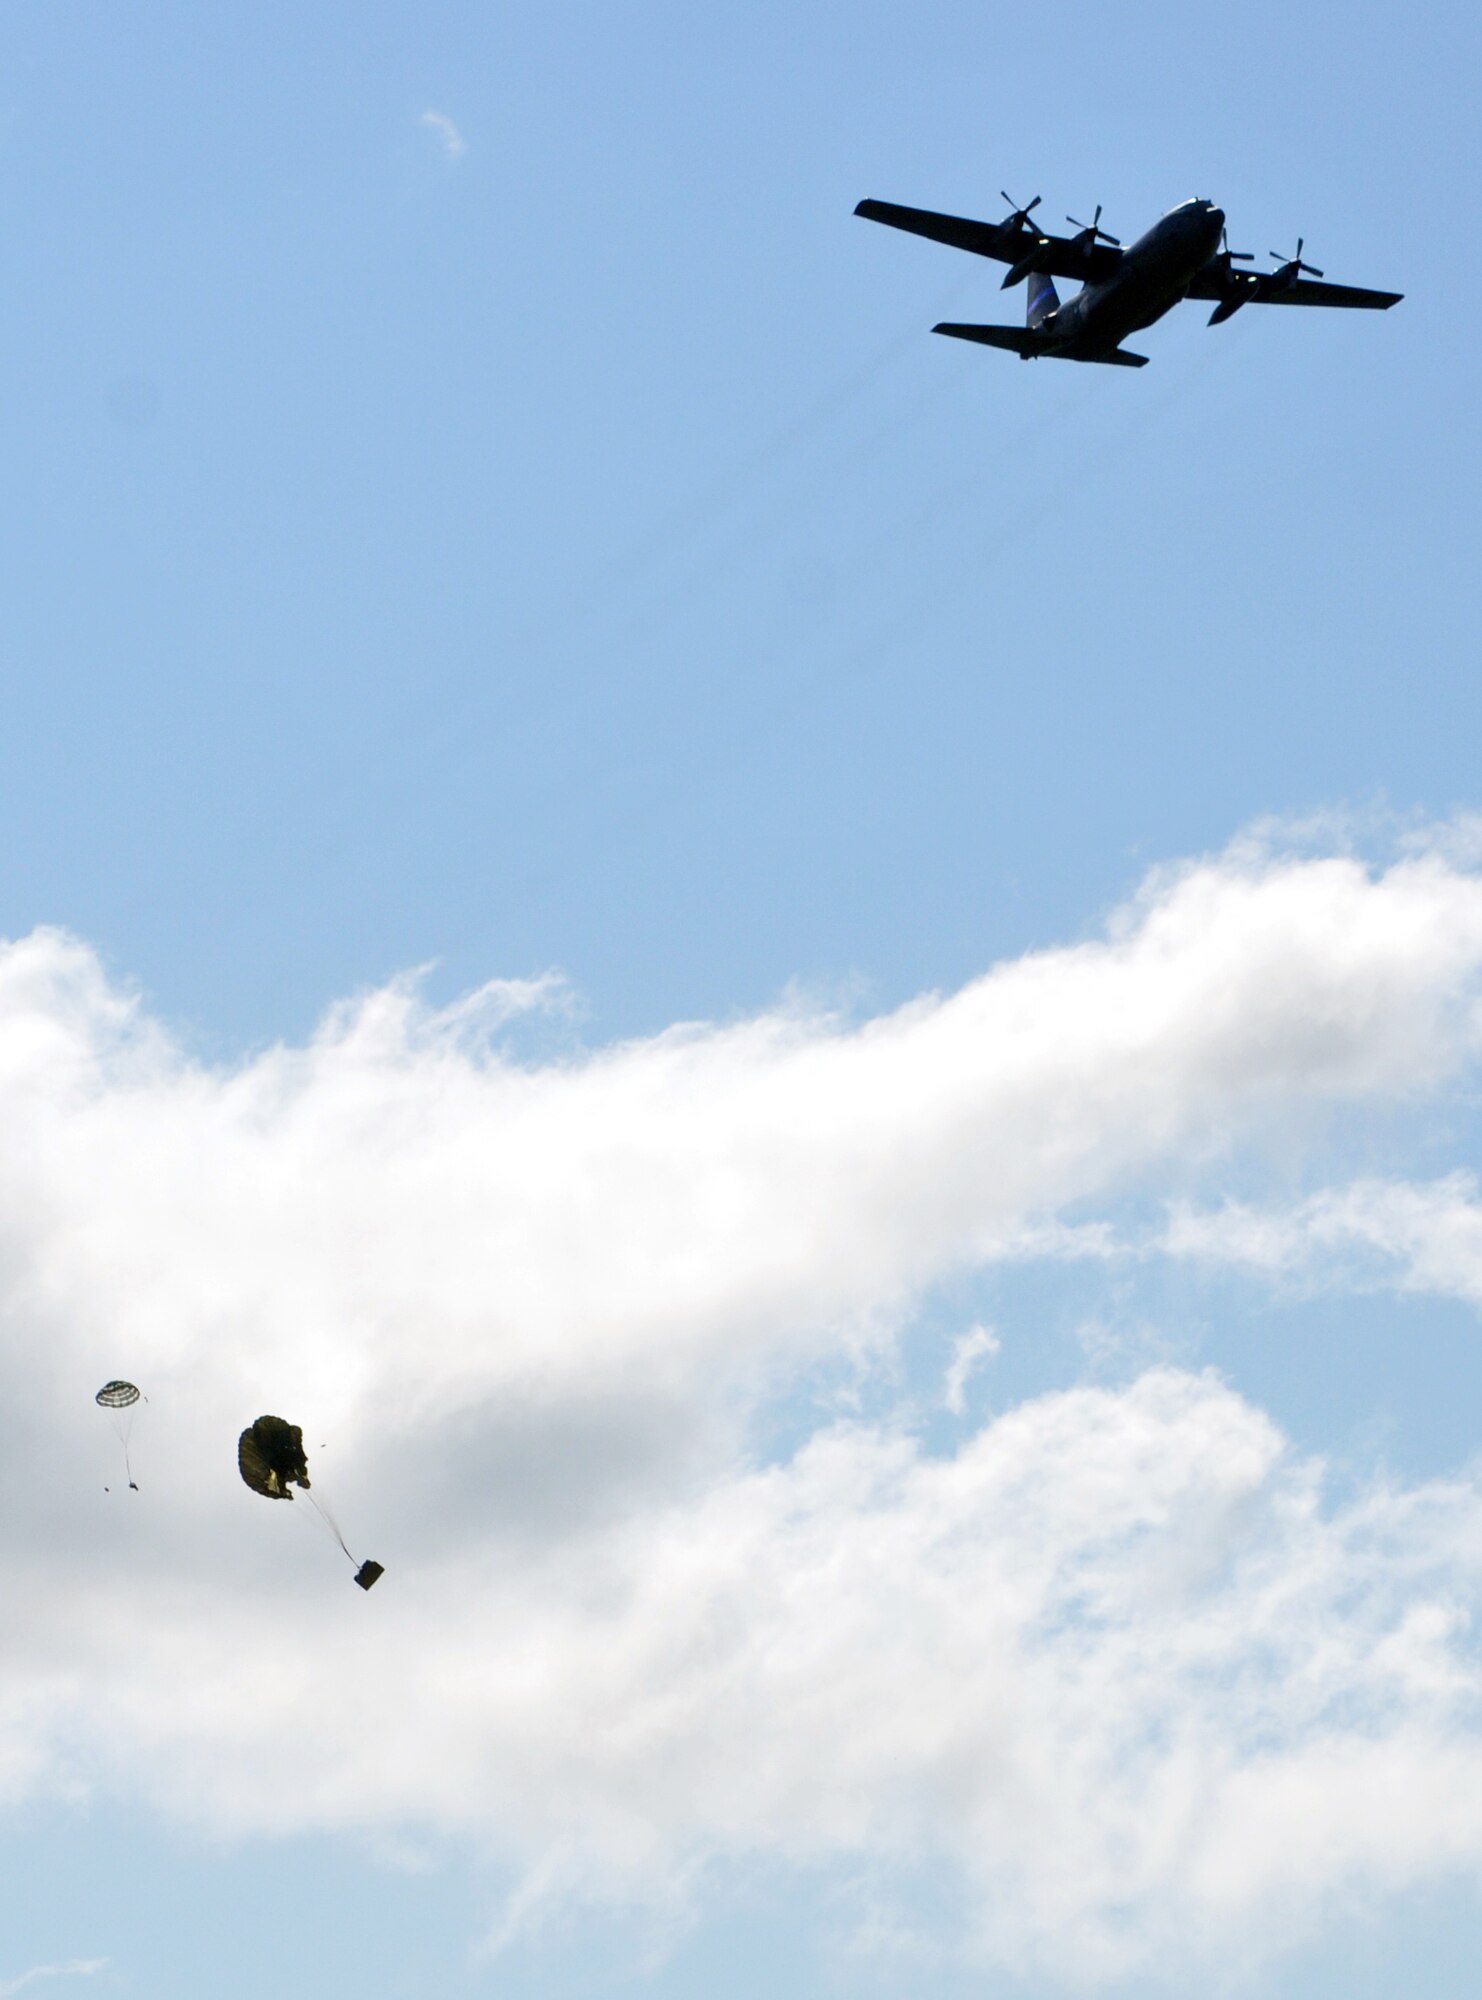 A C-130 from the 192nd Airlift Squadron, part of the Nevada Air National Guard 152nd Airlift Wing, drops various sizes of cargo to perform air drop training missions during the National Guard PATRIOT 2014 exercise at Volk Field, Wis. Several units of the Air National Guard, Army National Guard and Reserve units from several states are working with local, state and national organizations to train on, perform and assess their ability to respond to multiple emergencies.